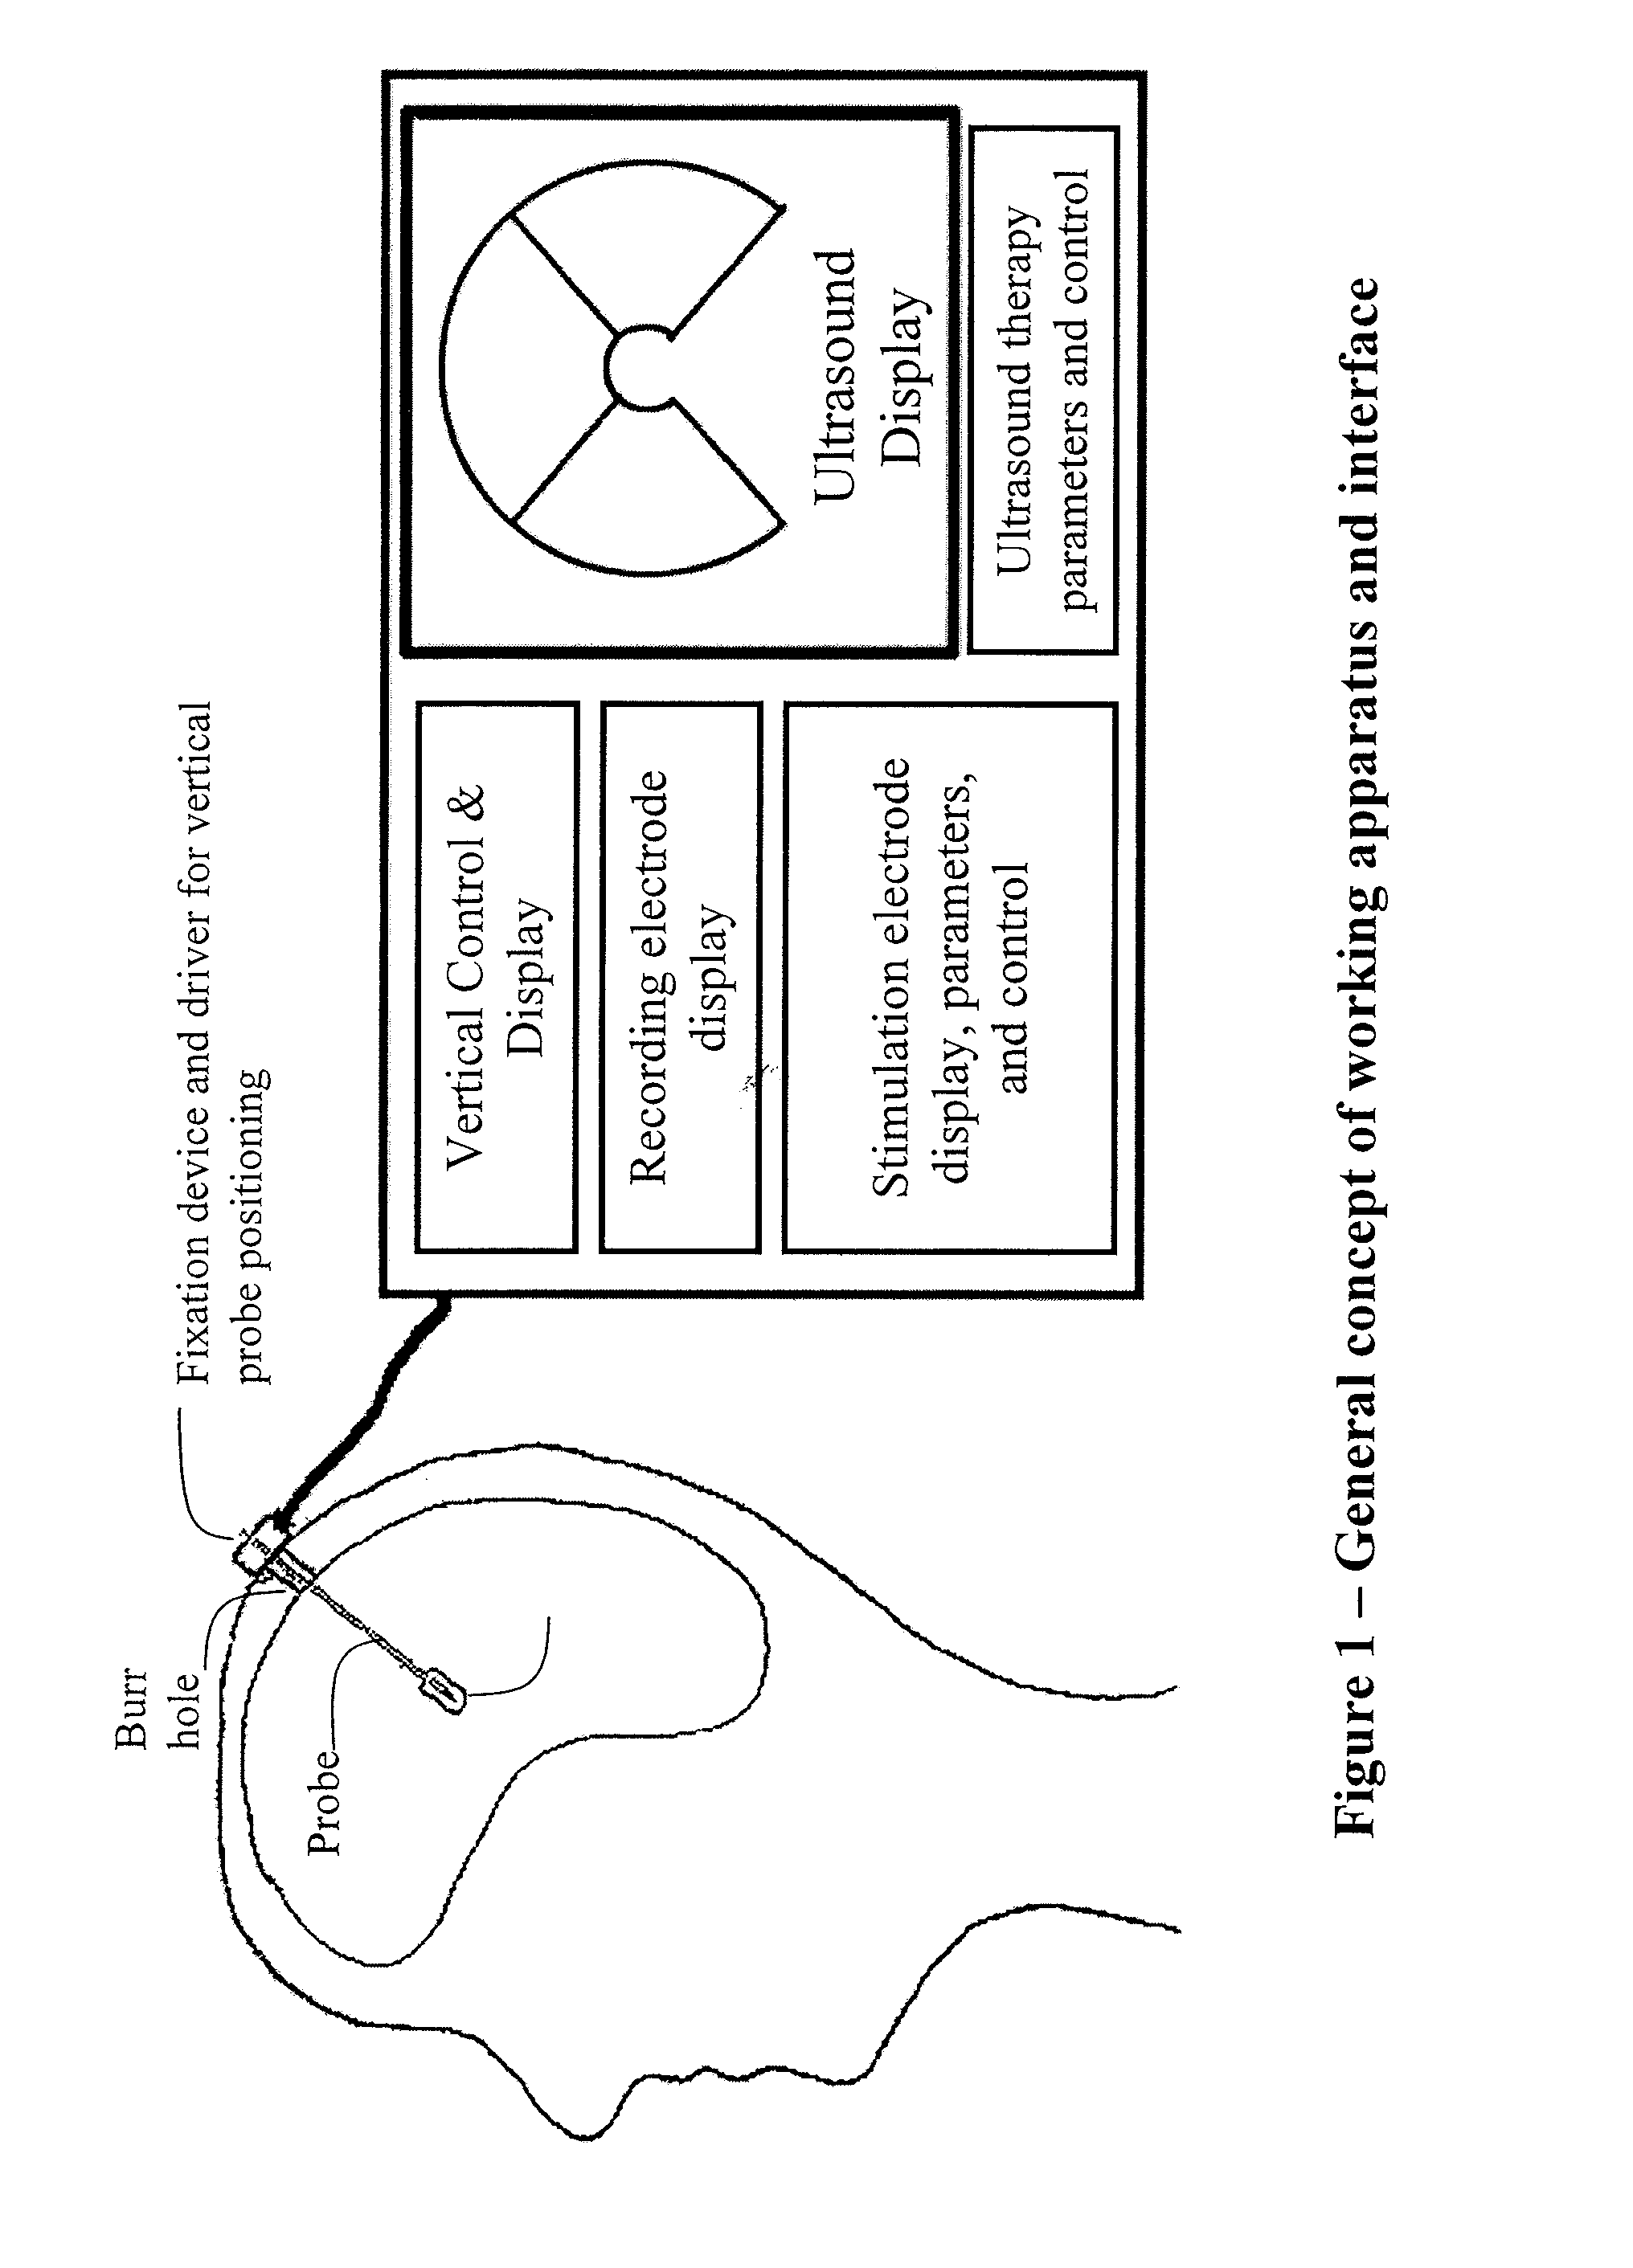 Hybrid ultrasound/electrode device for neural stimulation and recording